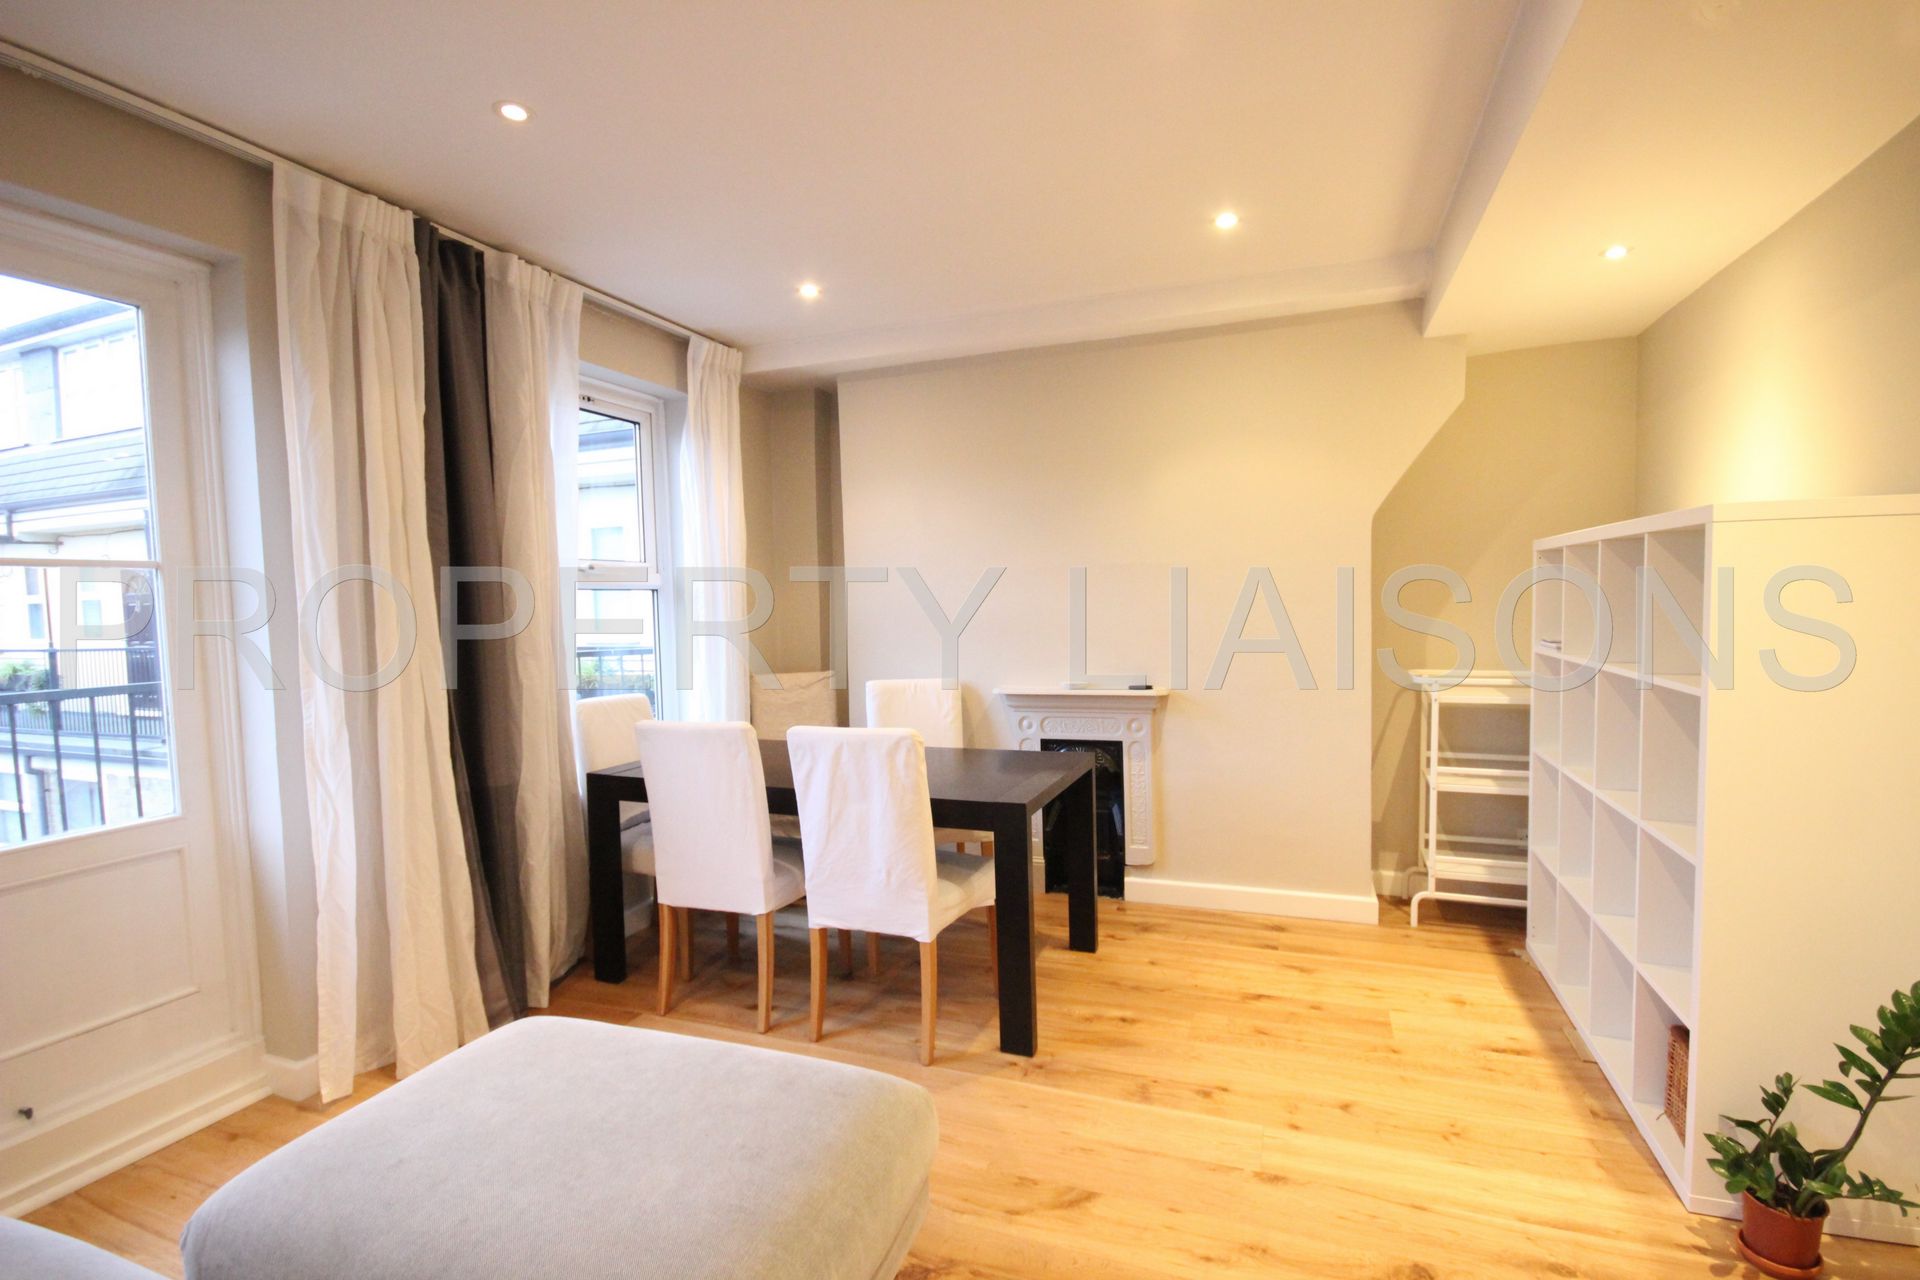 2 Bedroom Duplex to rent in Wapping, London, E1W